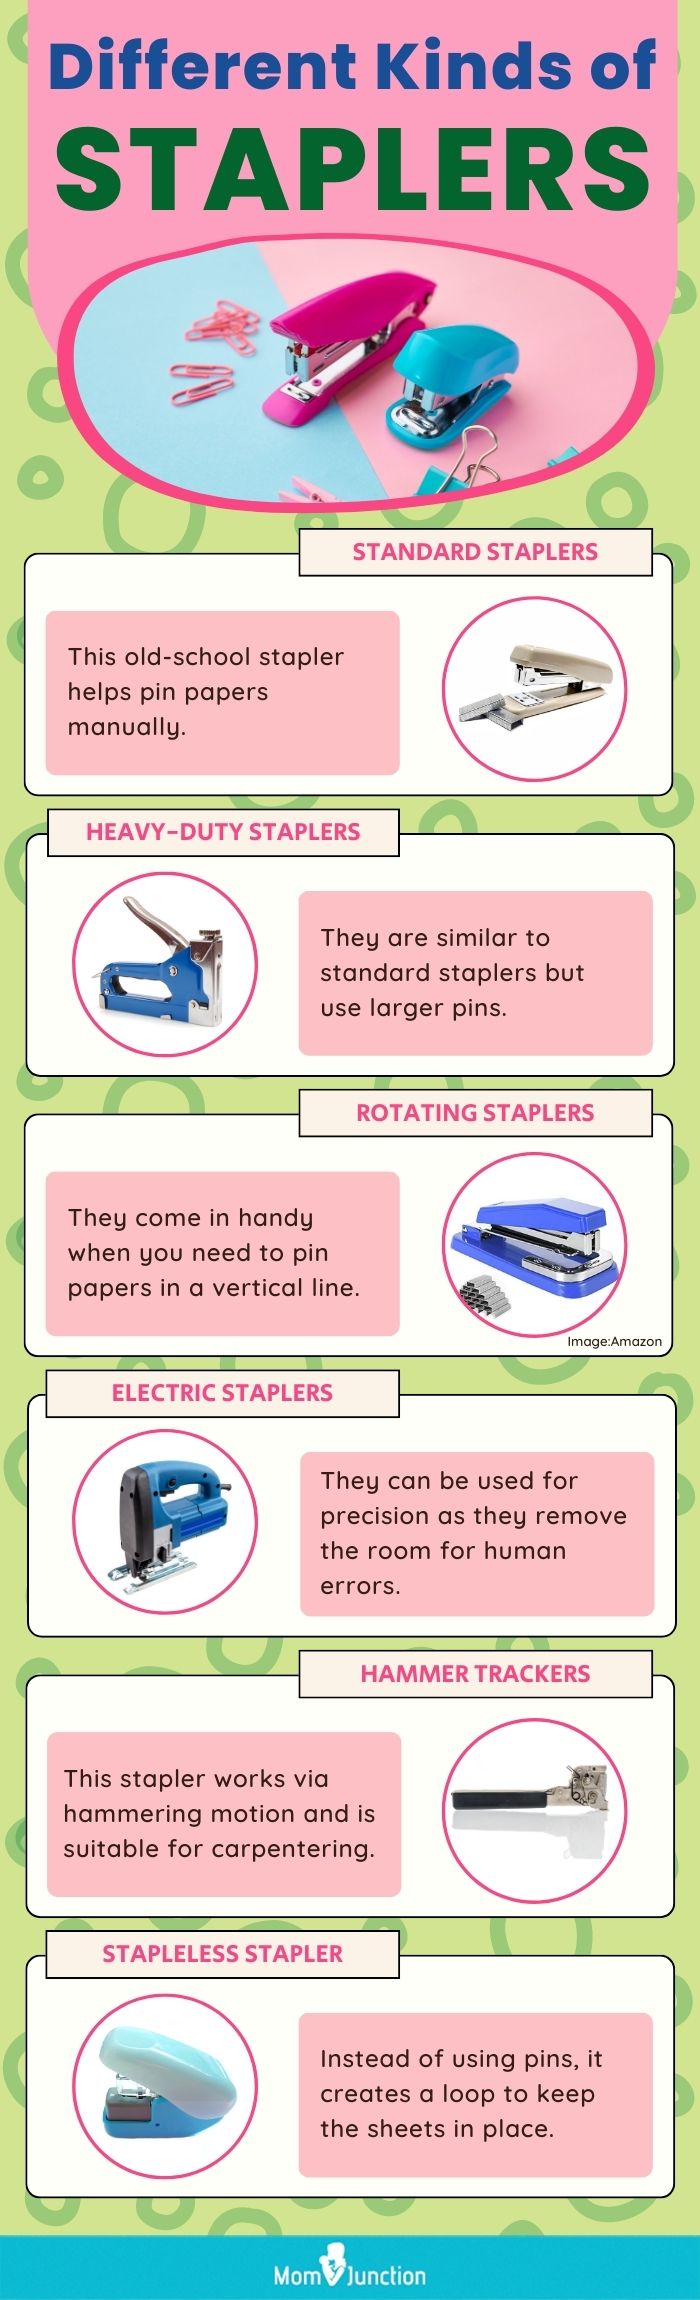 Different kinds of staplers (infographic)